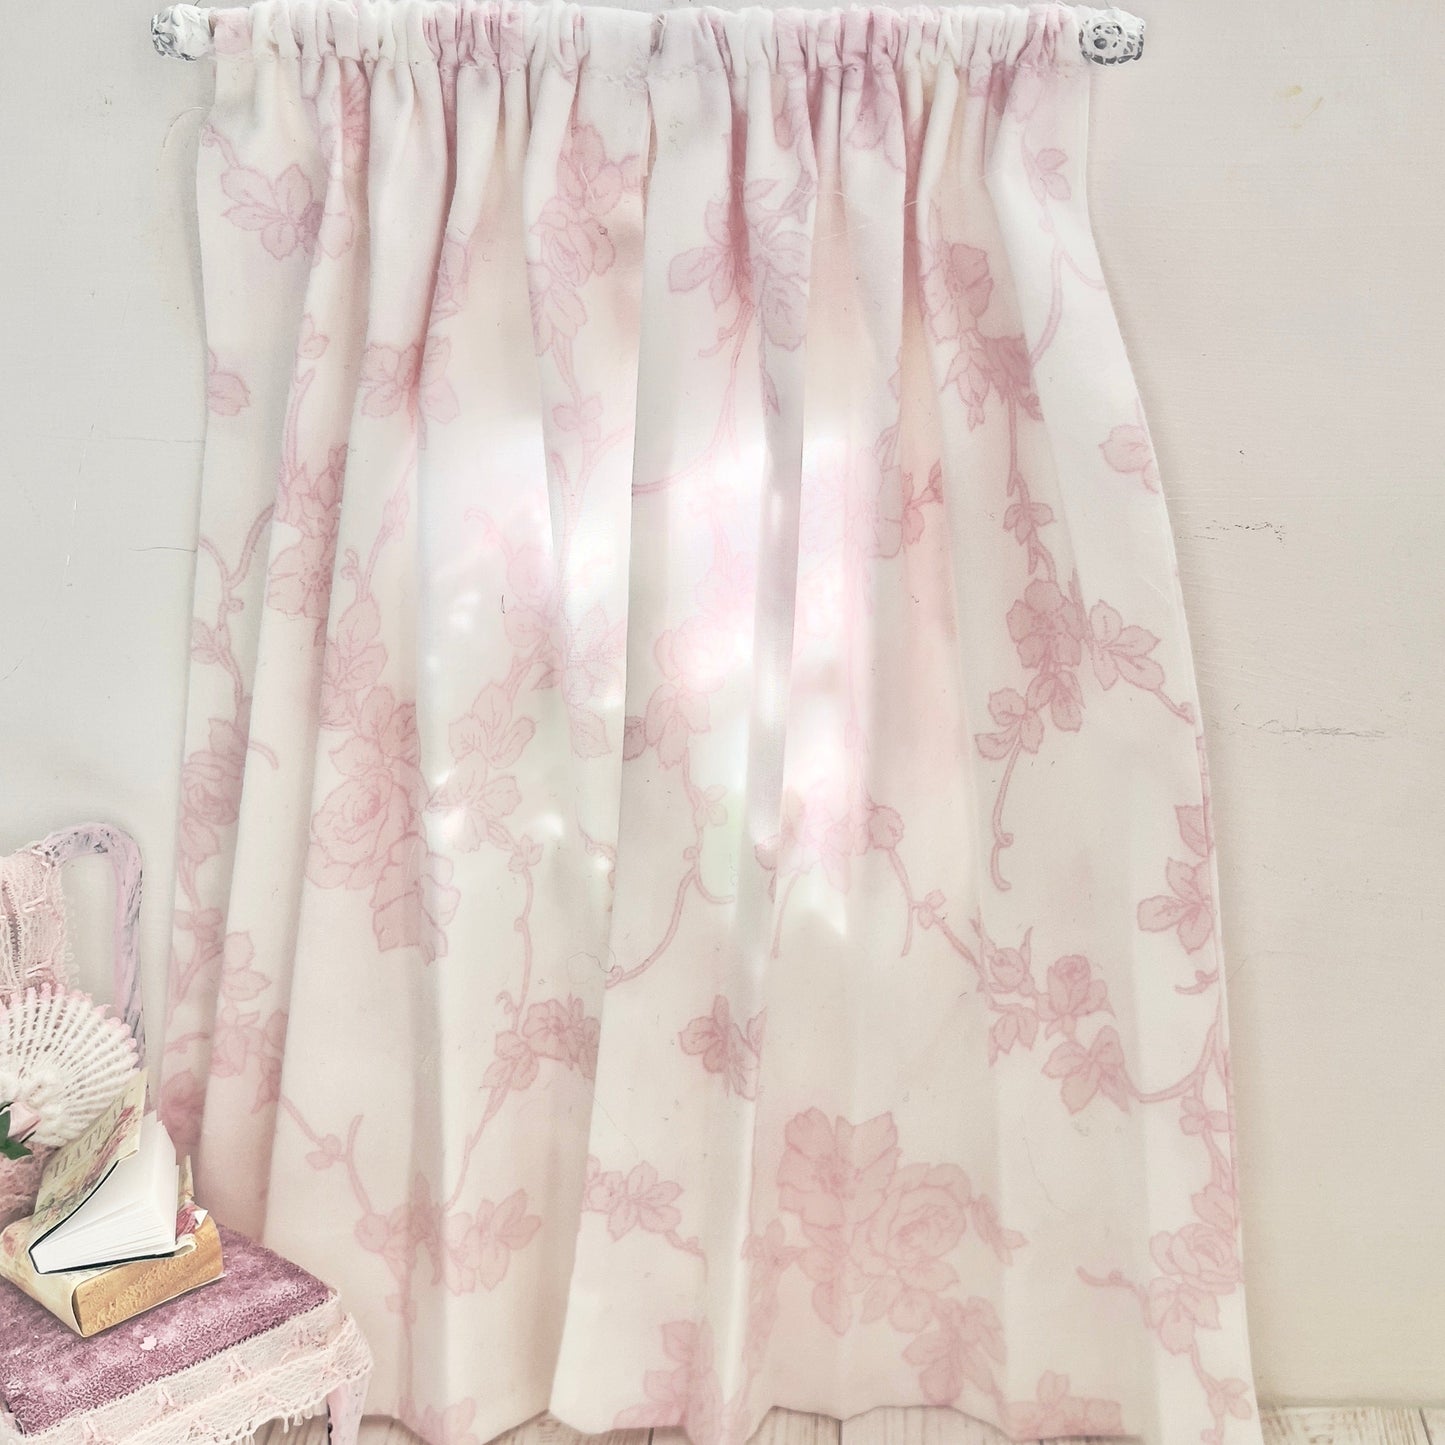 Chantallena Doll House Dollhouse Accessories CURTAINS- Faded Pink and White Floral Vines 2 Panel Cotton Curtains | Faded Floral Vine | Soft Furnishings